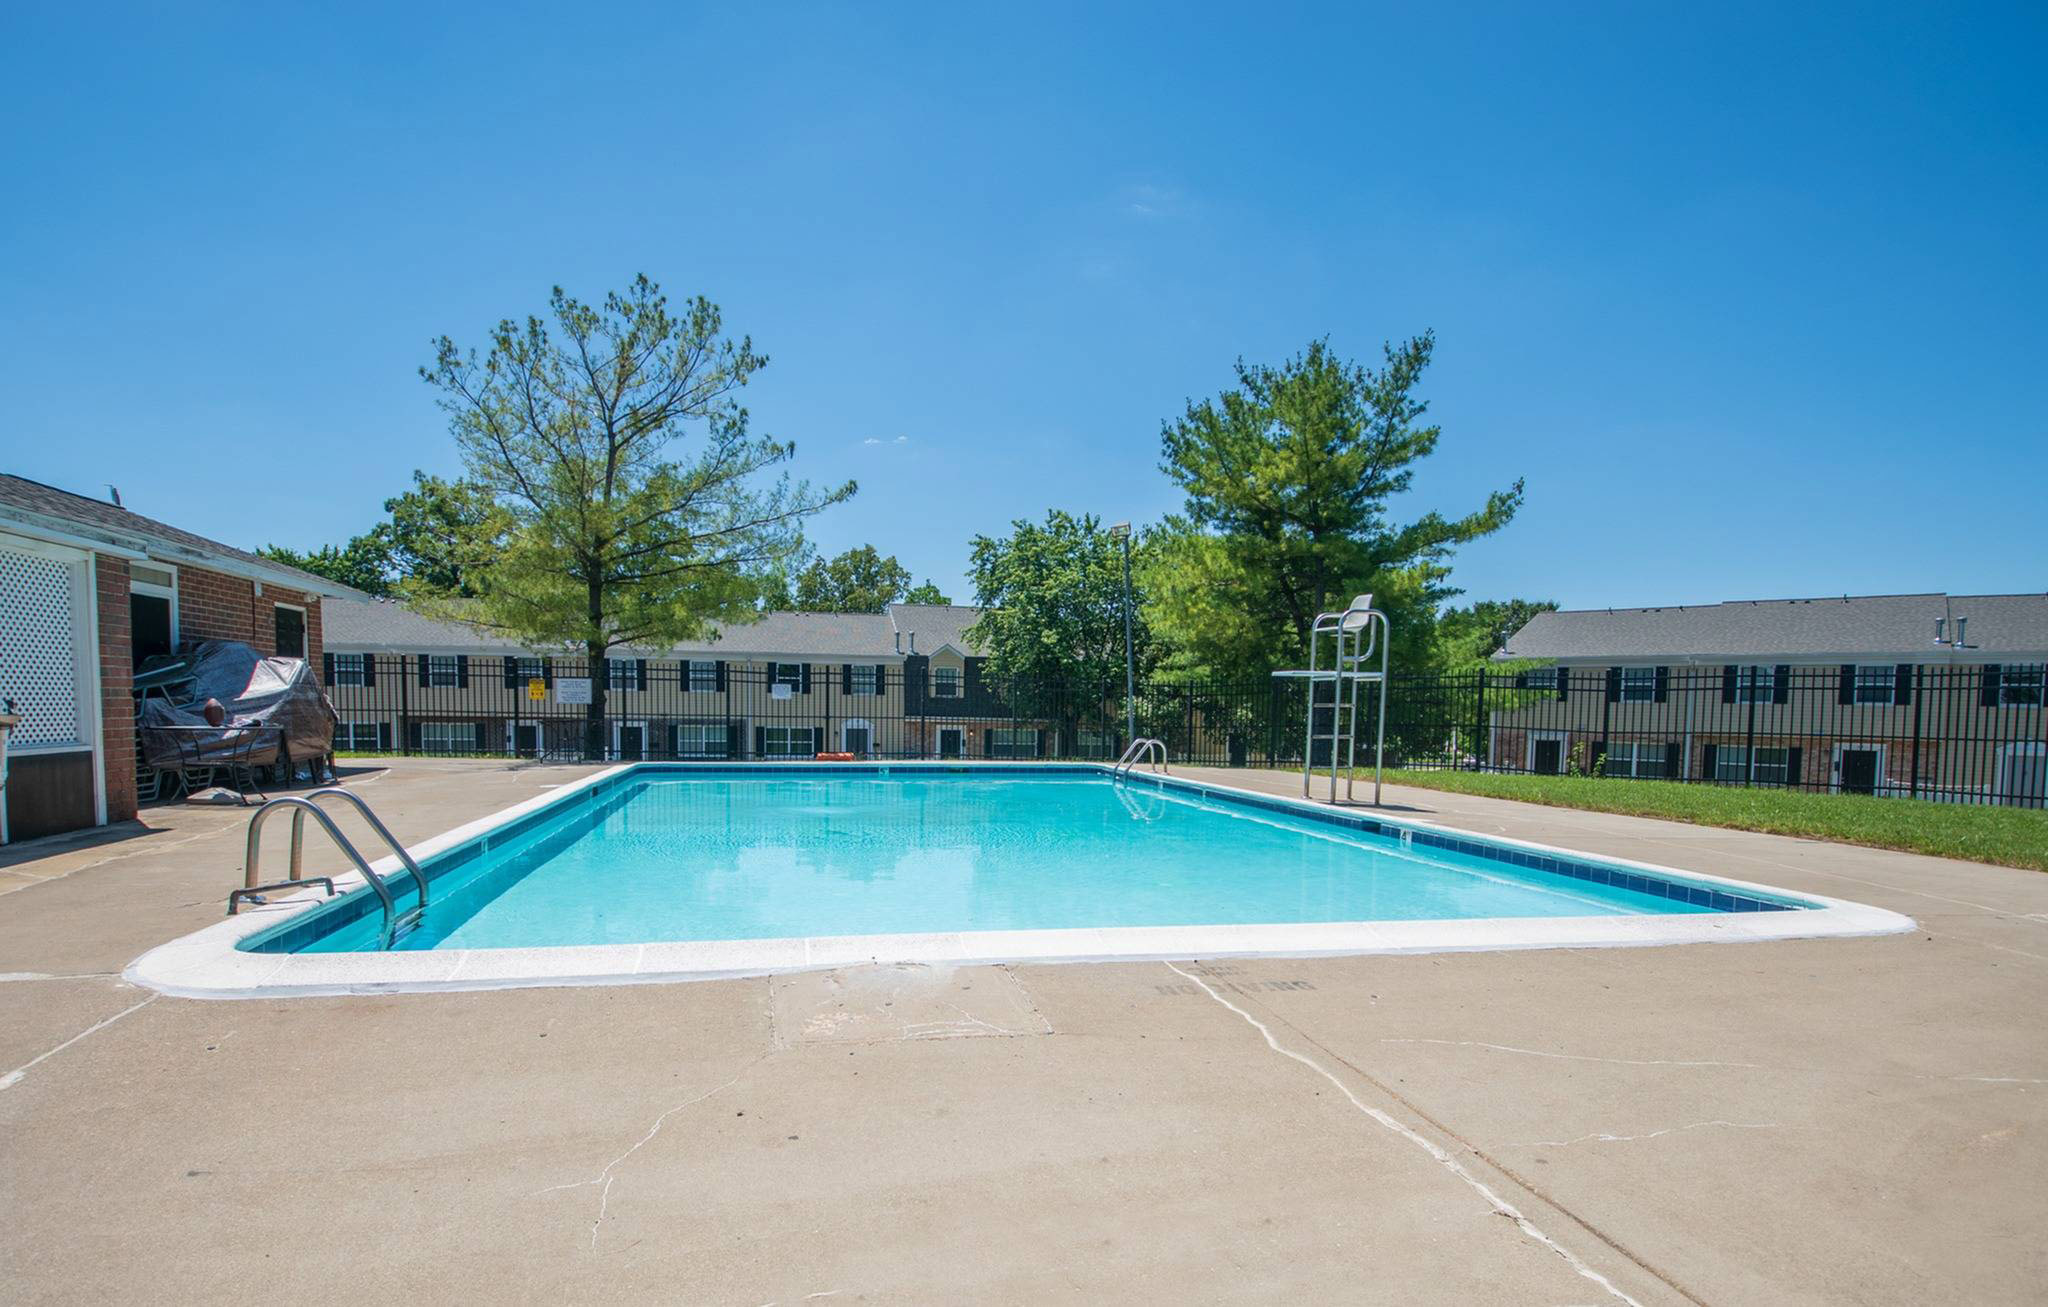 Fenced-in outdoor pool area at Middle River Townhomes.